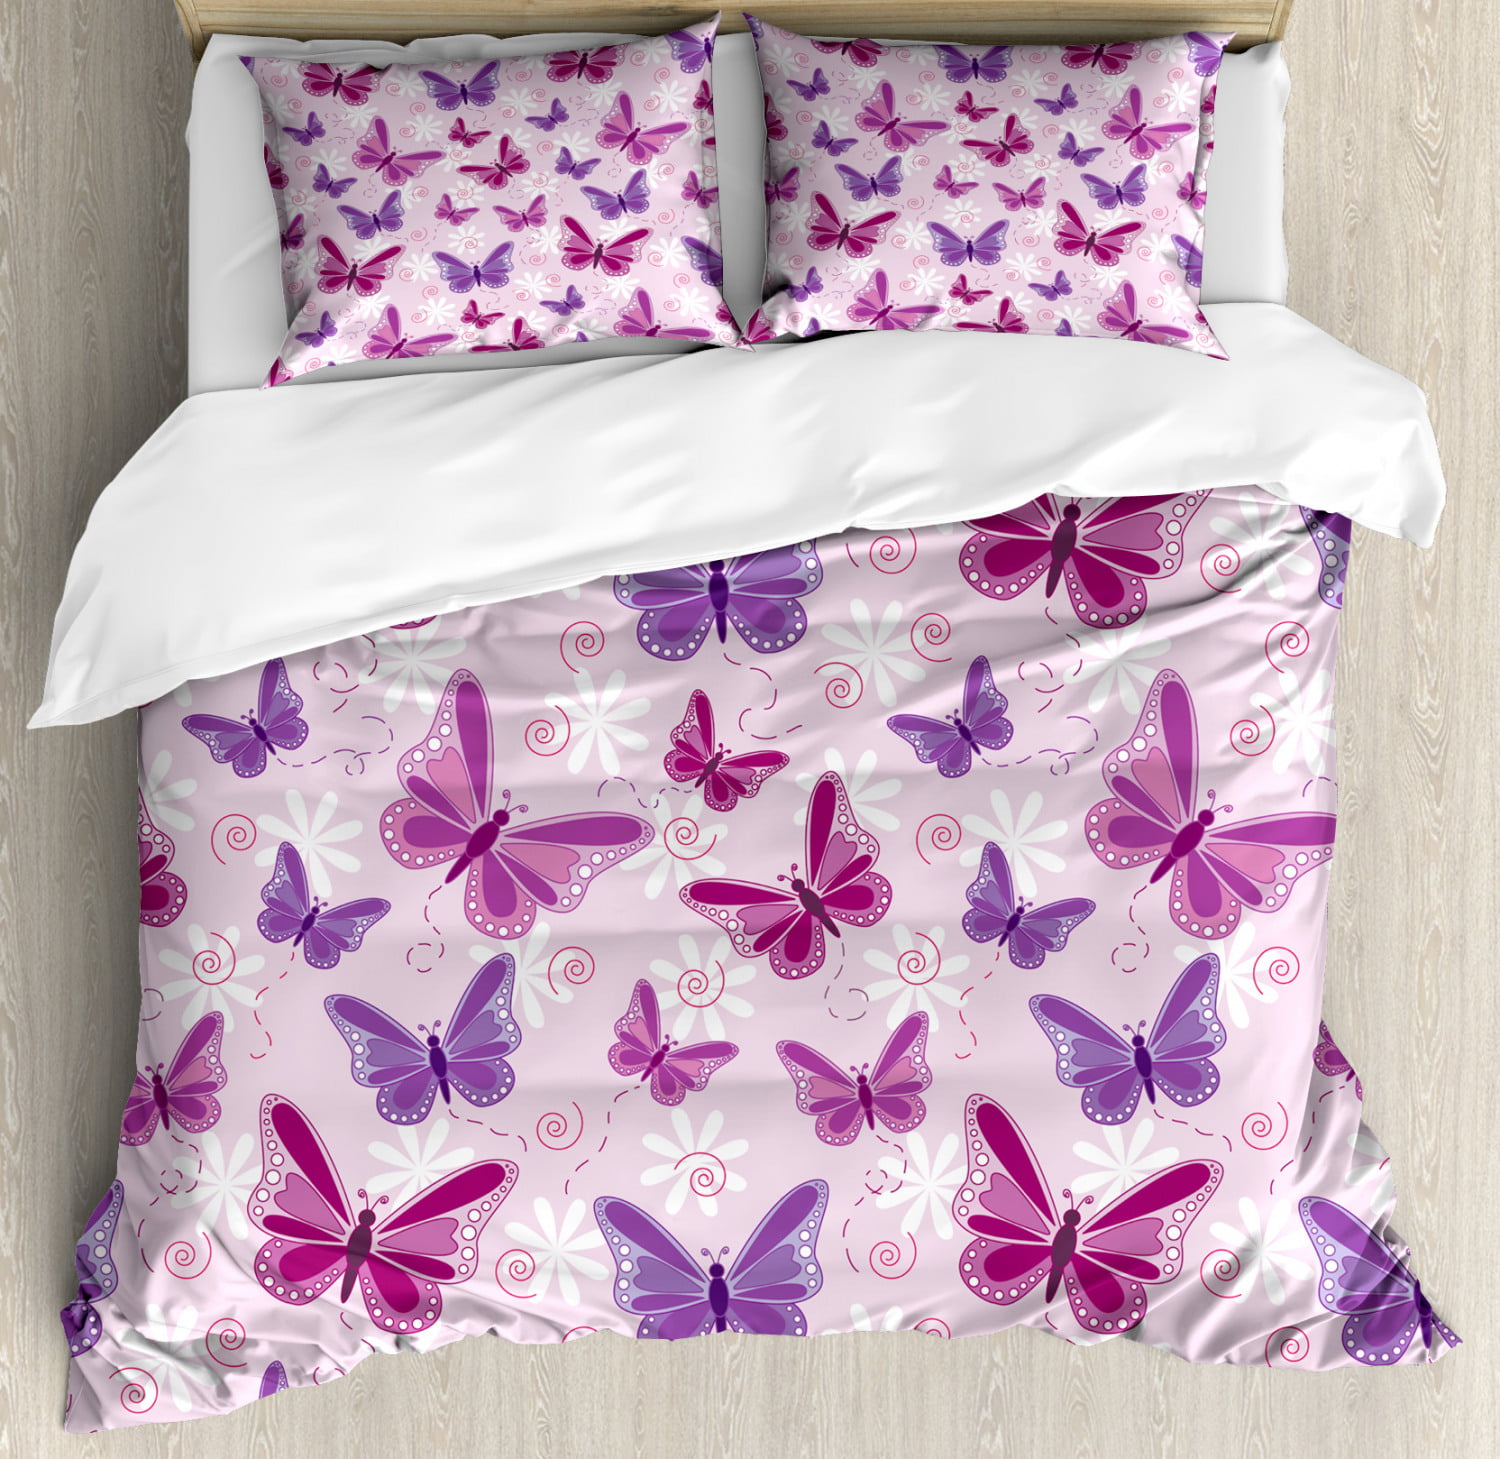 Nature Quilted Bedspread & Pillow Shams Set Colorful Butterflies Fly Print